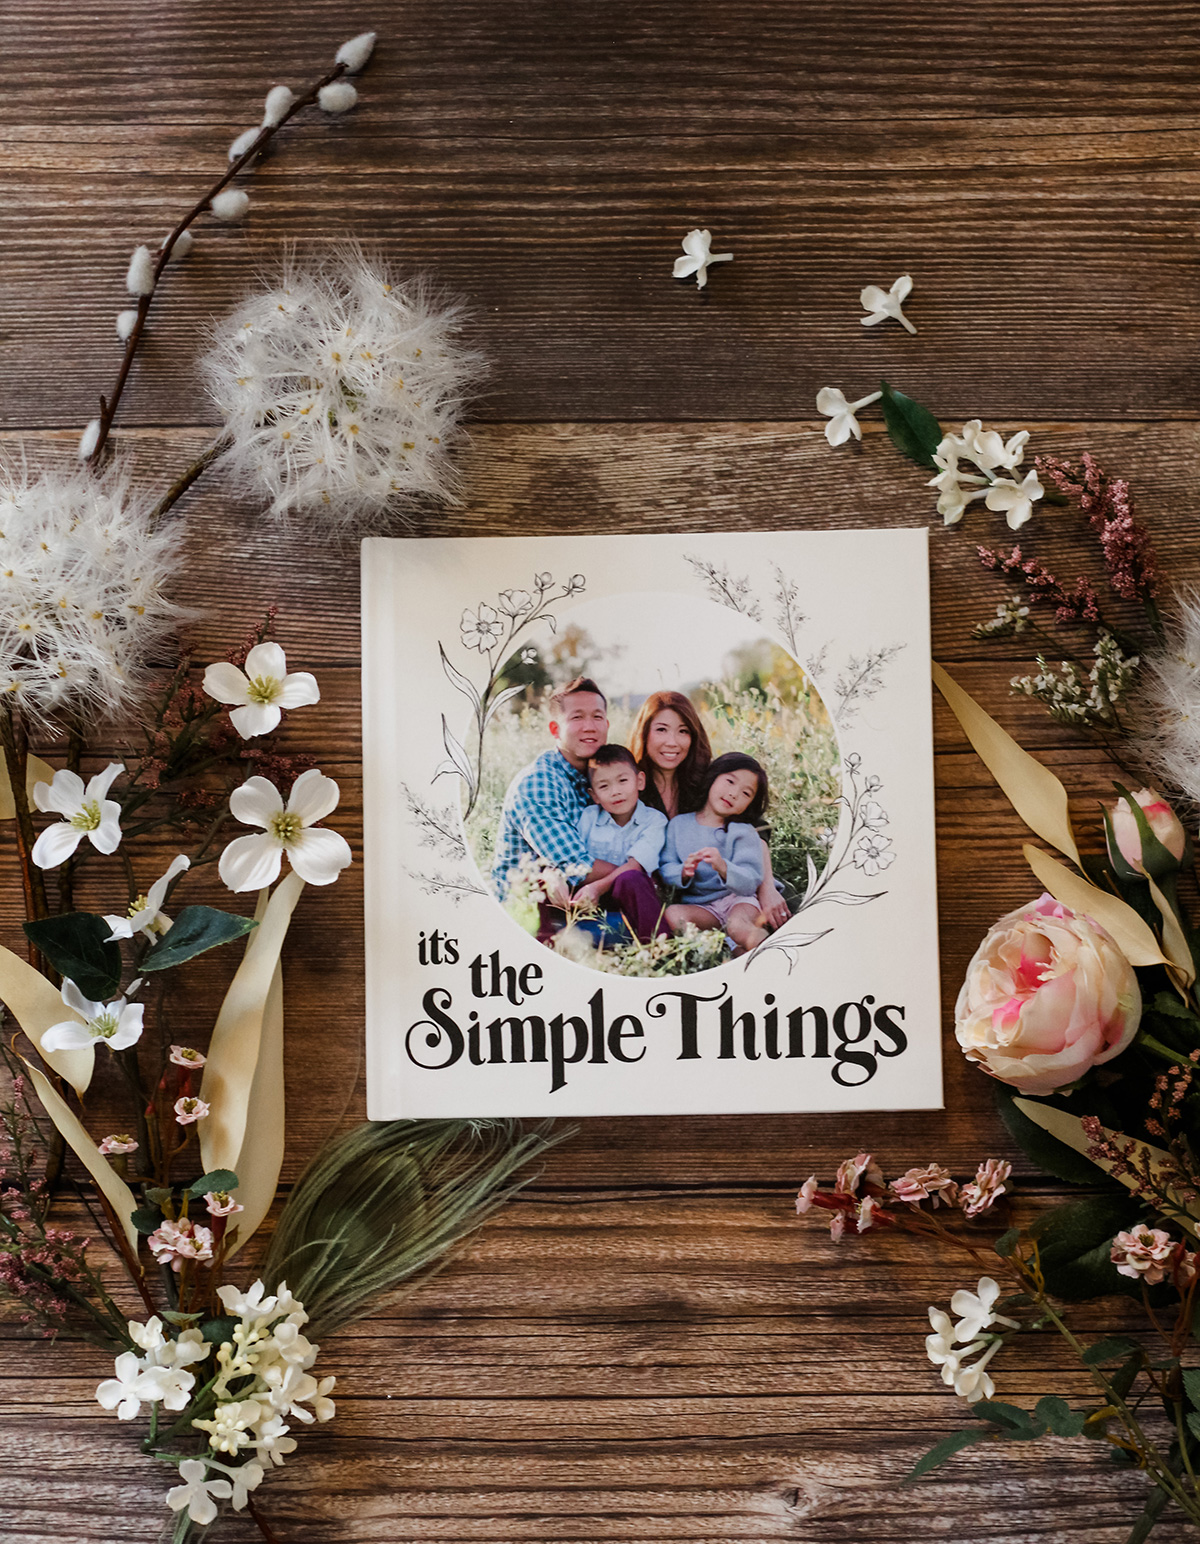 Lily & Val for Mixbook -Everyday Custom Photo Book "It's The Simple Things"